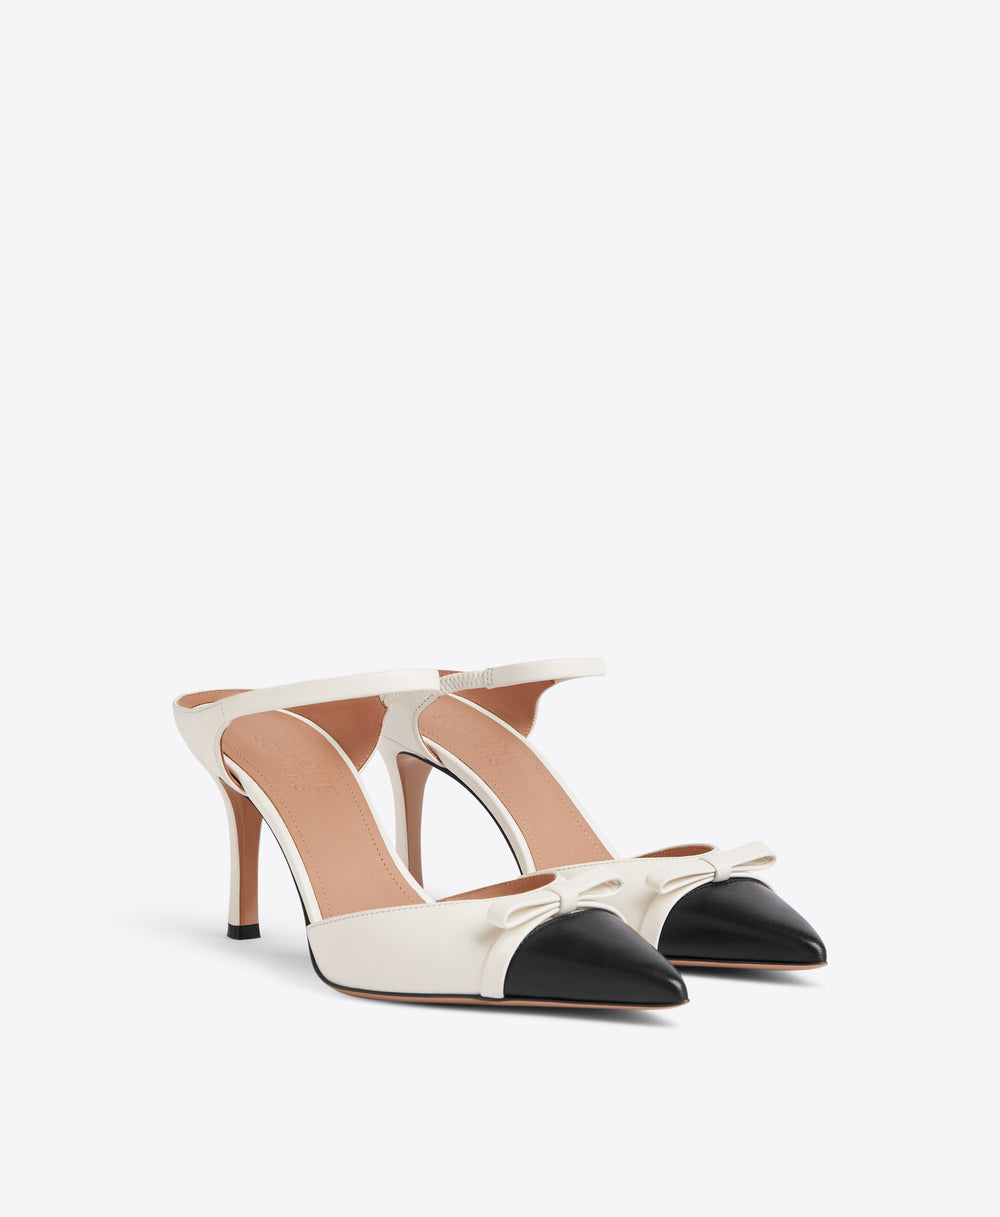 Malone Souliers Blythe 80 Black and White Leather Mules